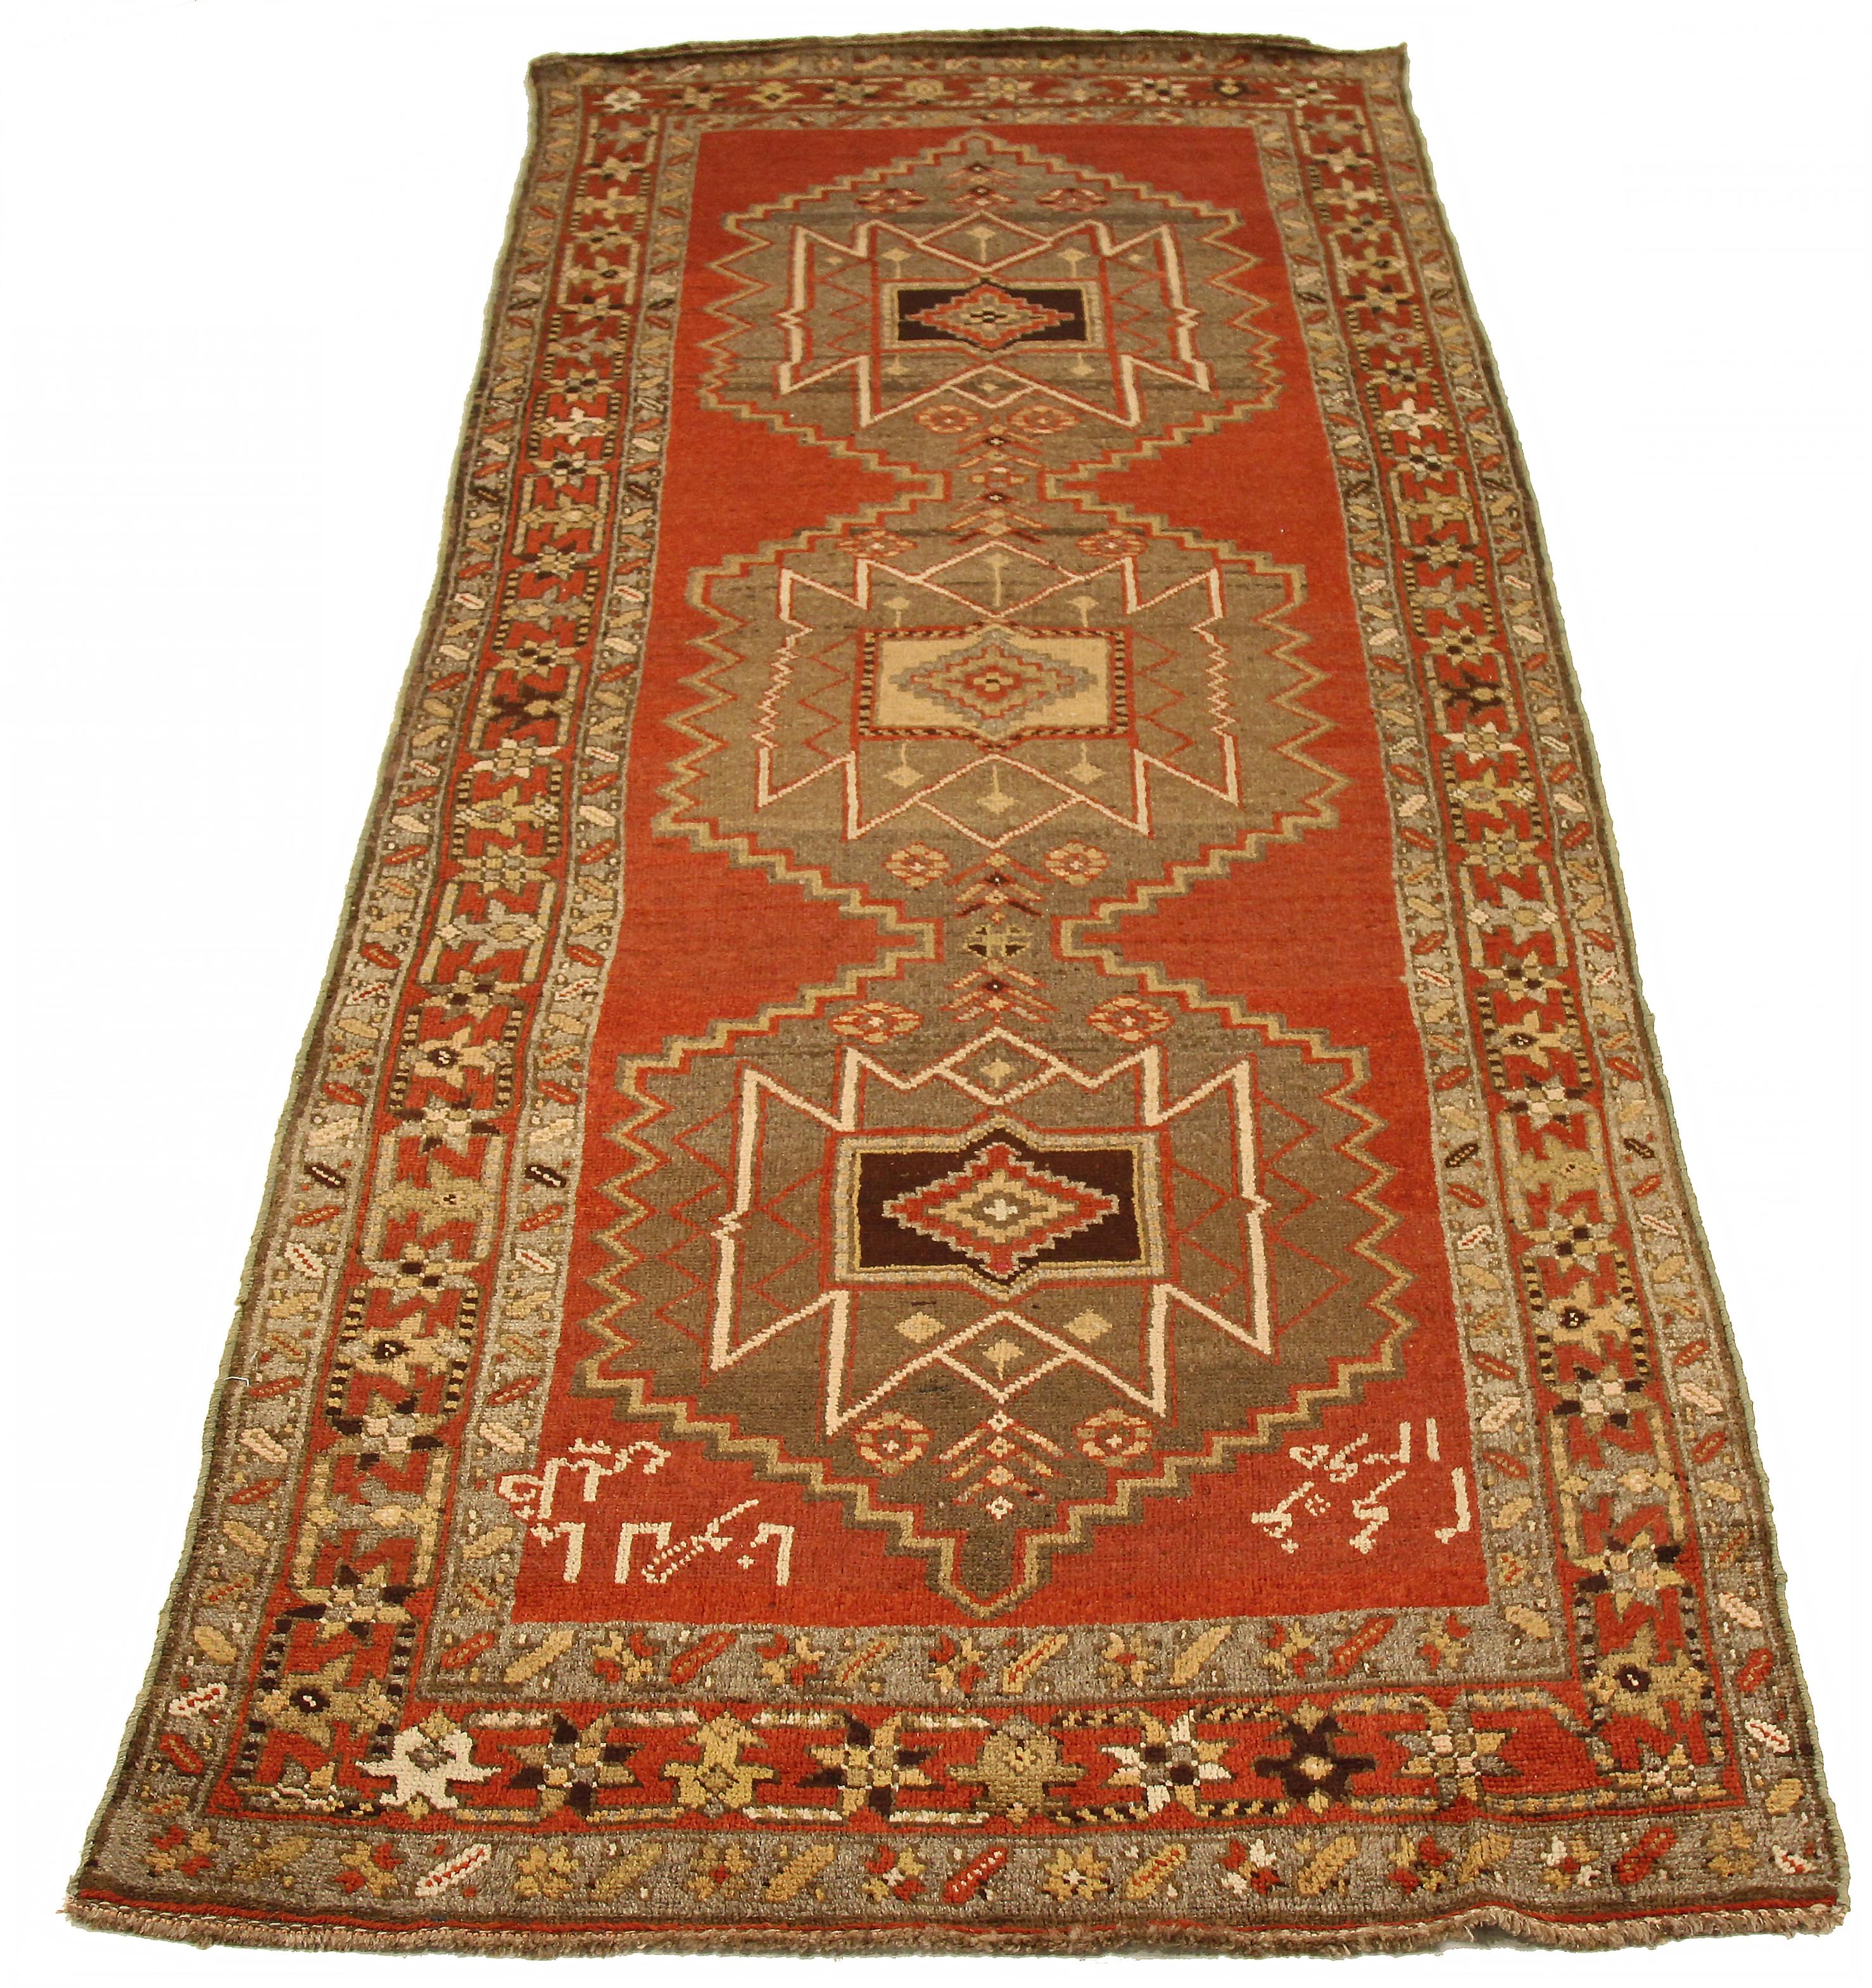 Antique Persian area rug handwoven from the finest sheep’s wool. It’s colored with all-natural vegetable dyes that are safe for humans and pets. It’s a traditional Azerbaijan design featuring tribal details on a red field. It’s a lovely piece to